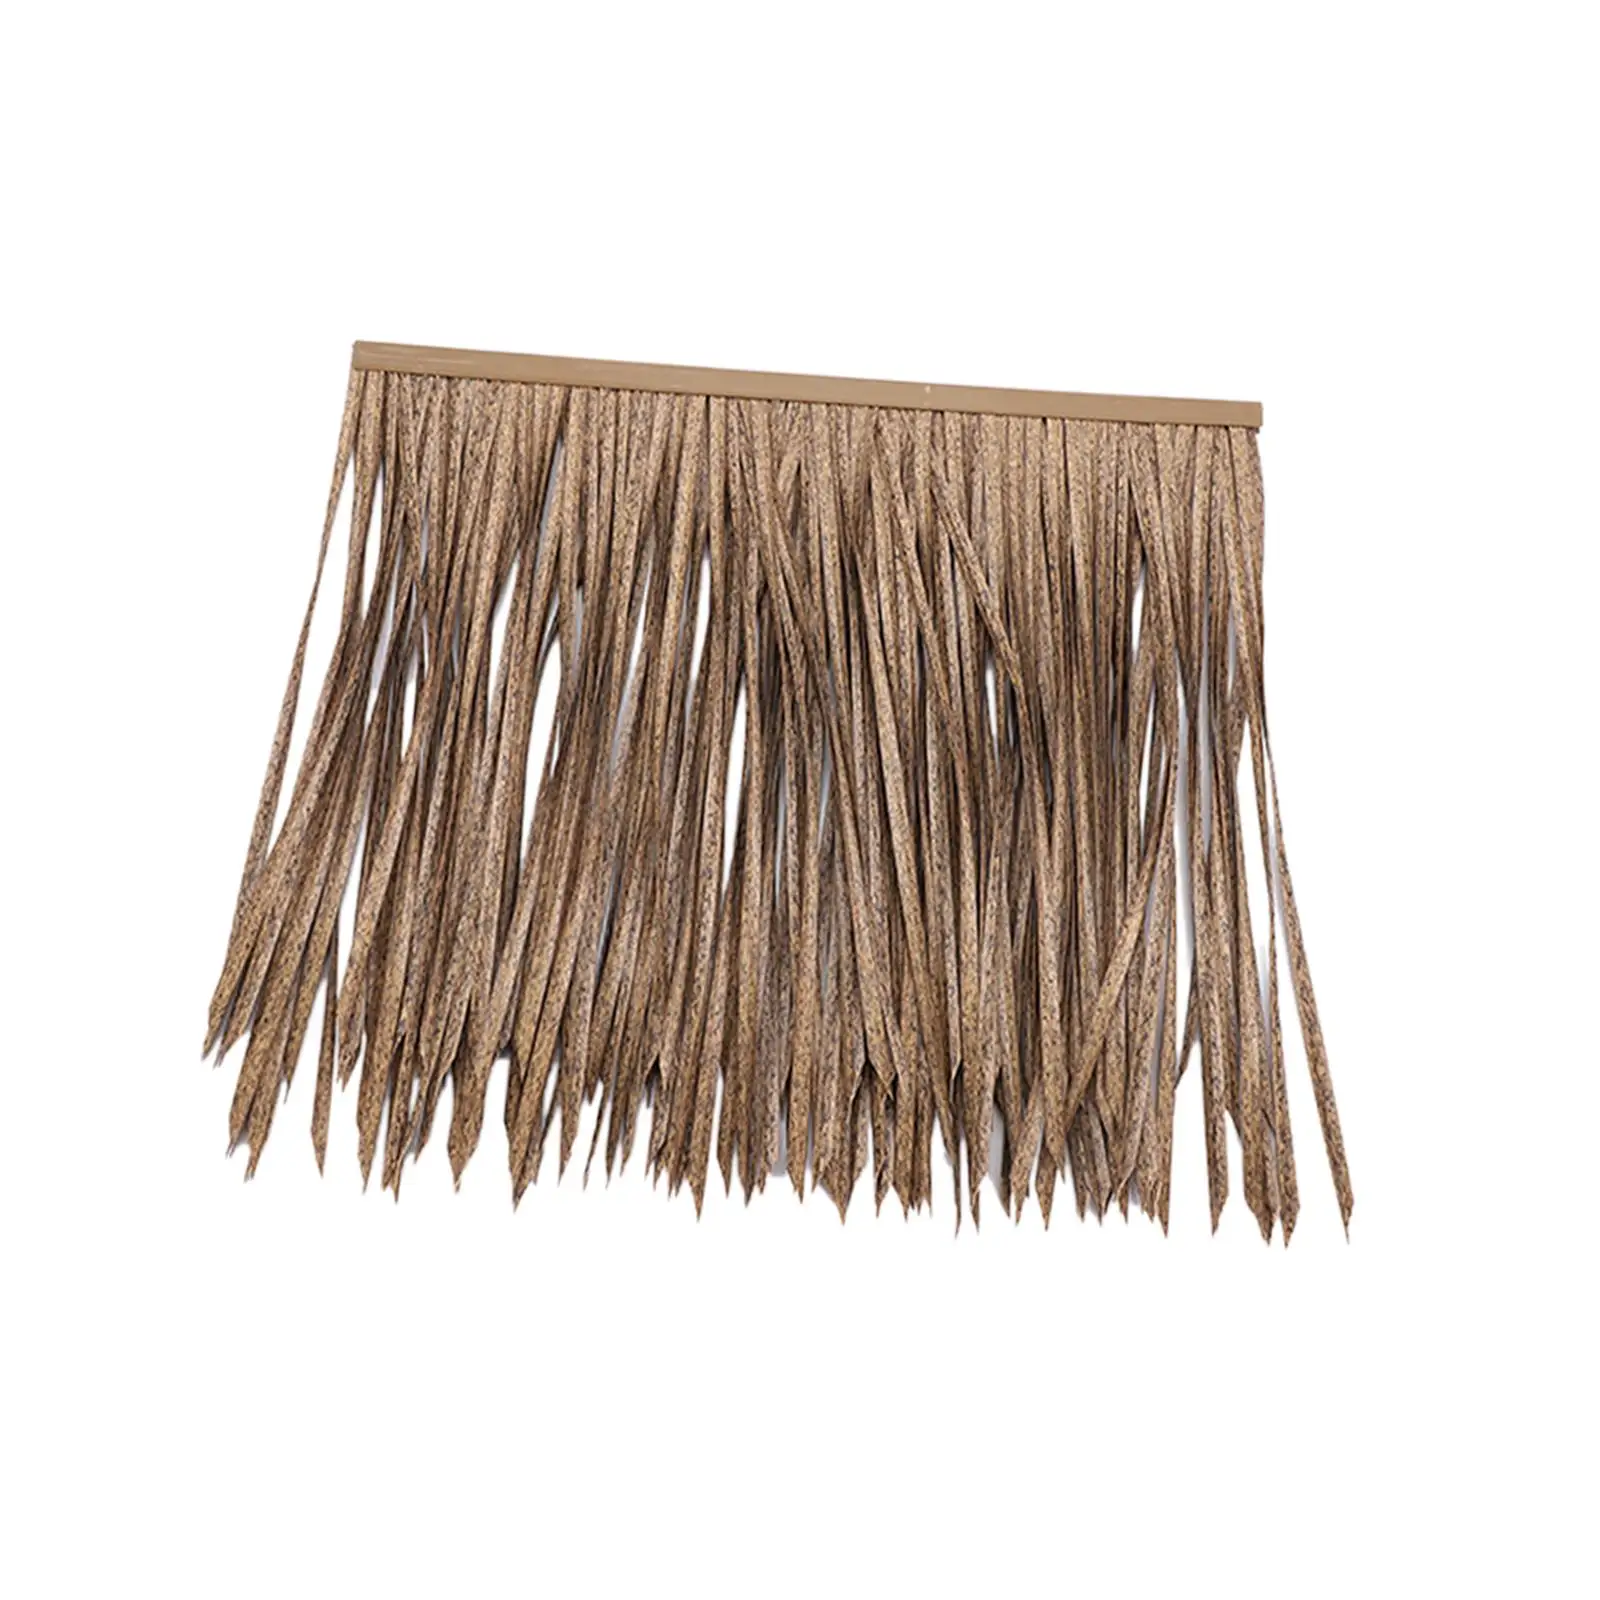 Simulated Thatch Roof Centerpiece Rustic Universal DIY Panel Palm Thatch Roll for Bars Roof Villas Rural Renovation Gazebo Fence